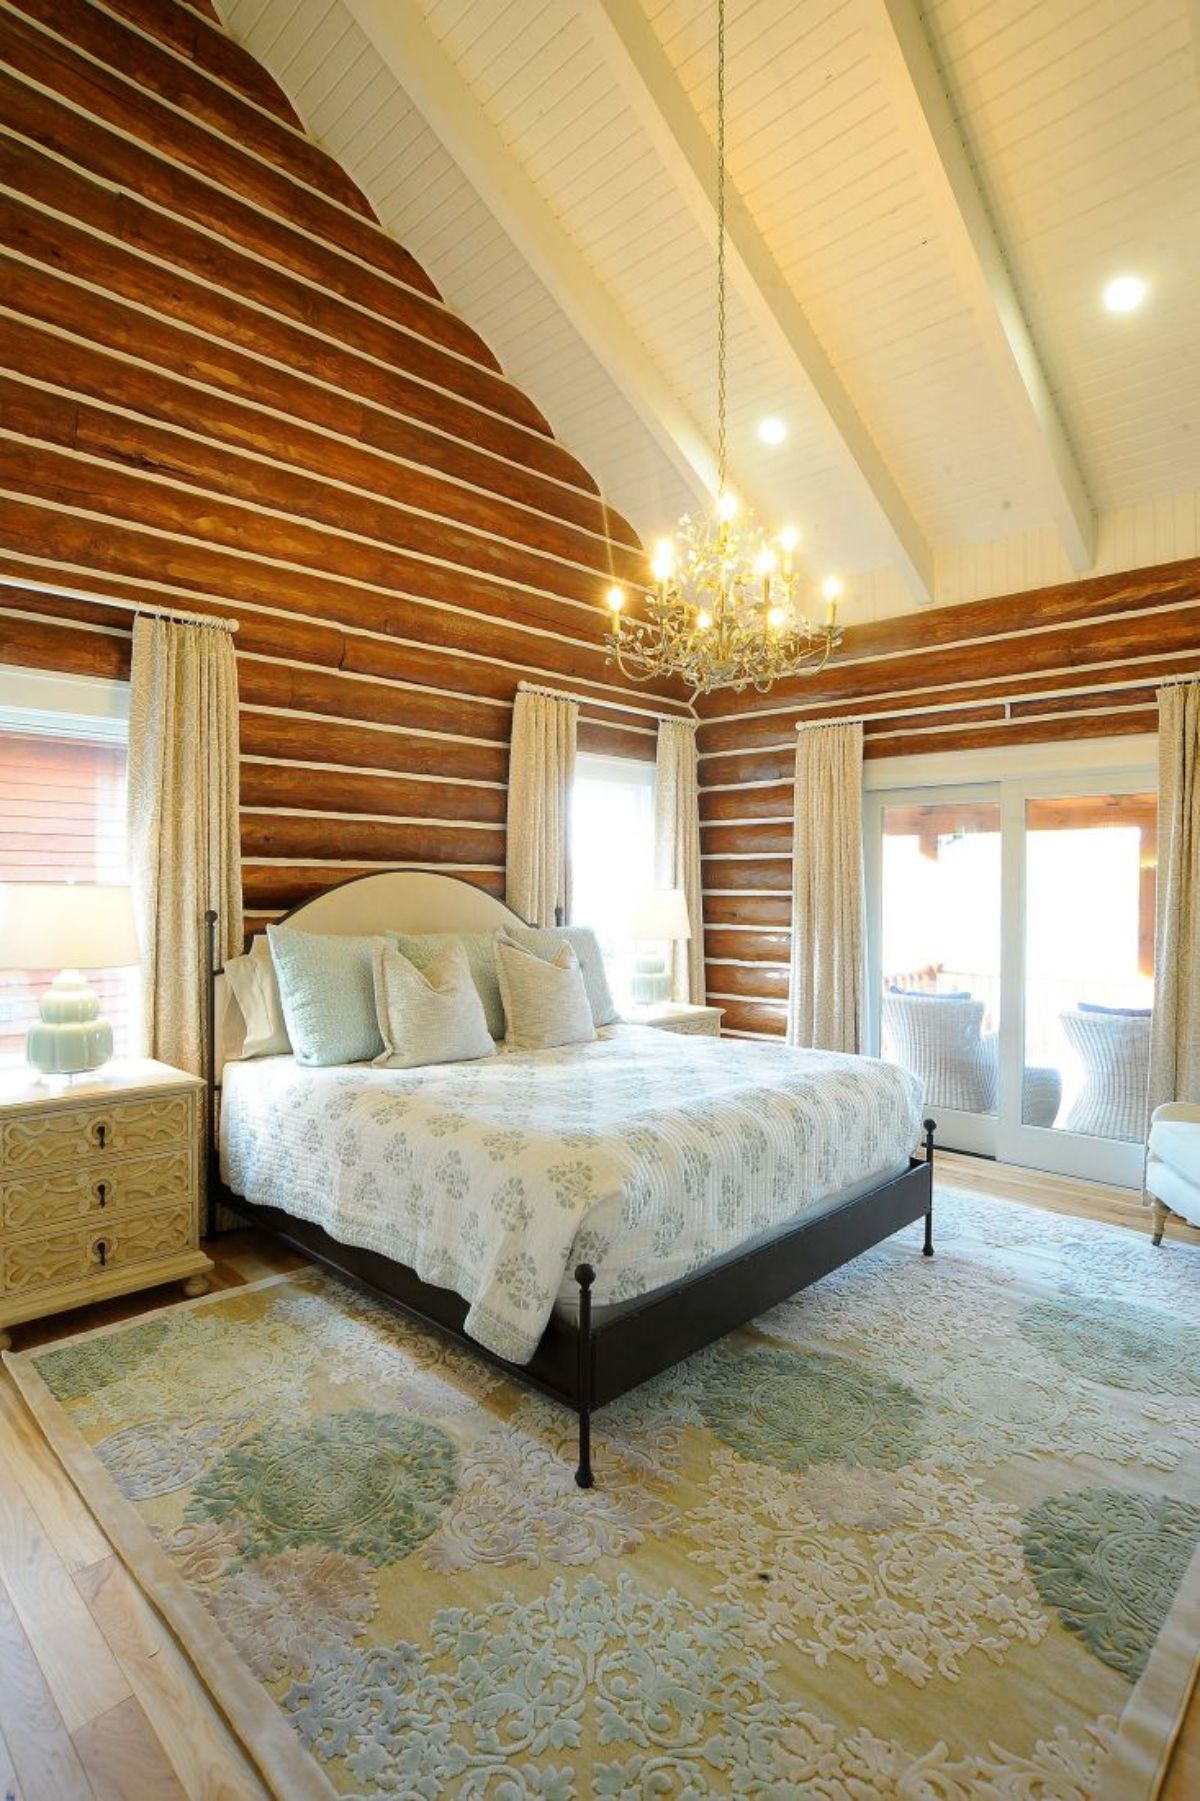 black bedframe with white bedding against chinked log wall